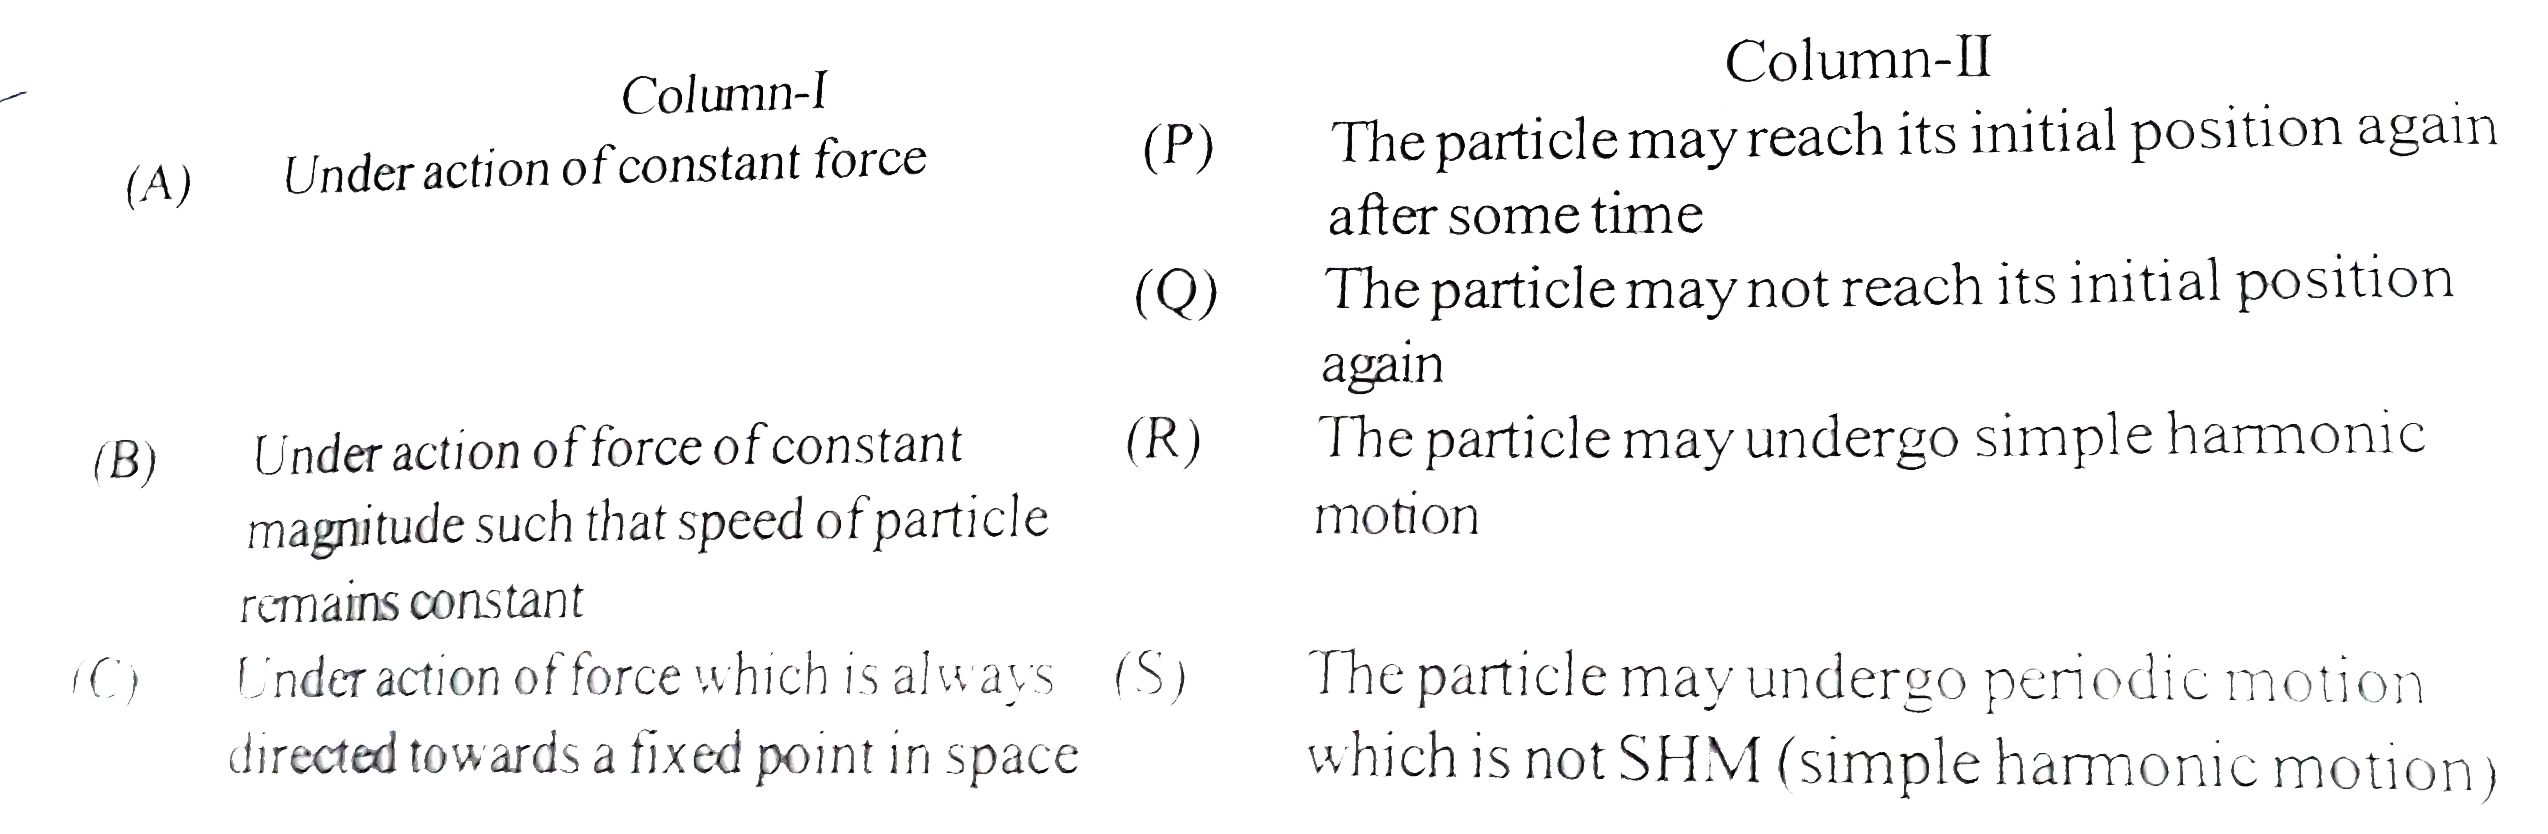 A particle having nonzero initial velocity is subjected to different kinds of resultant forces as mentioned in each situation of column-I. The resulting motion is mentioned in column-II. Match the condition on particle in each situation of column-I with the corresponding resulats that may be possible as given in column-II